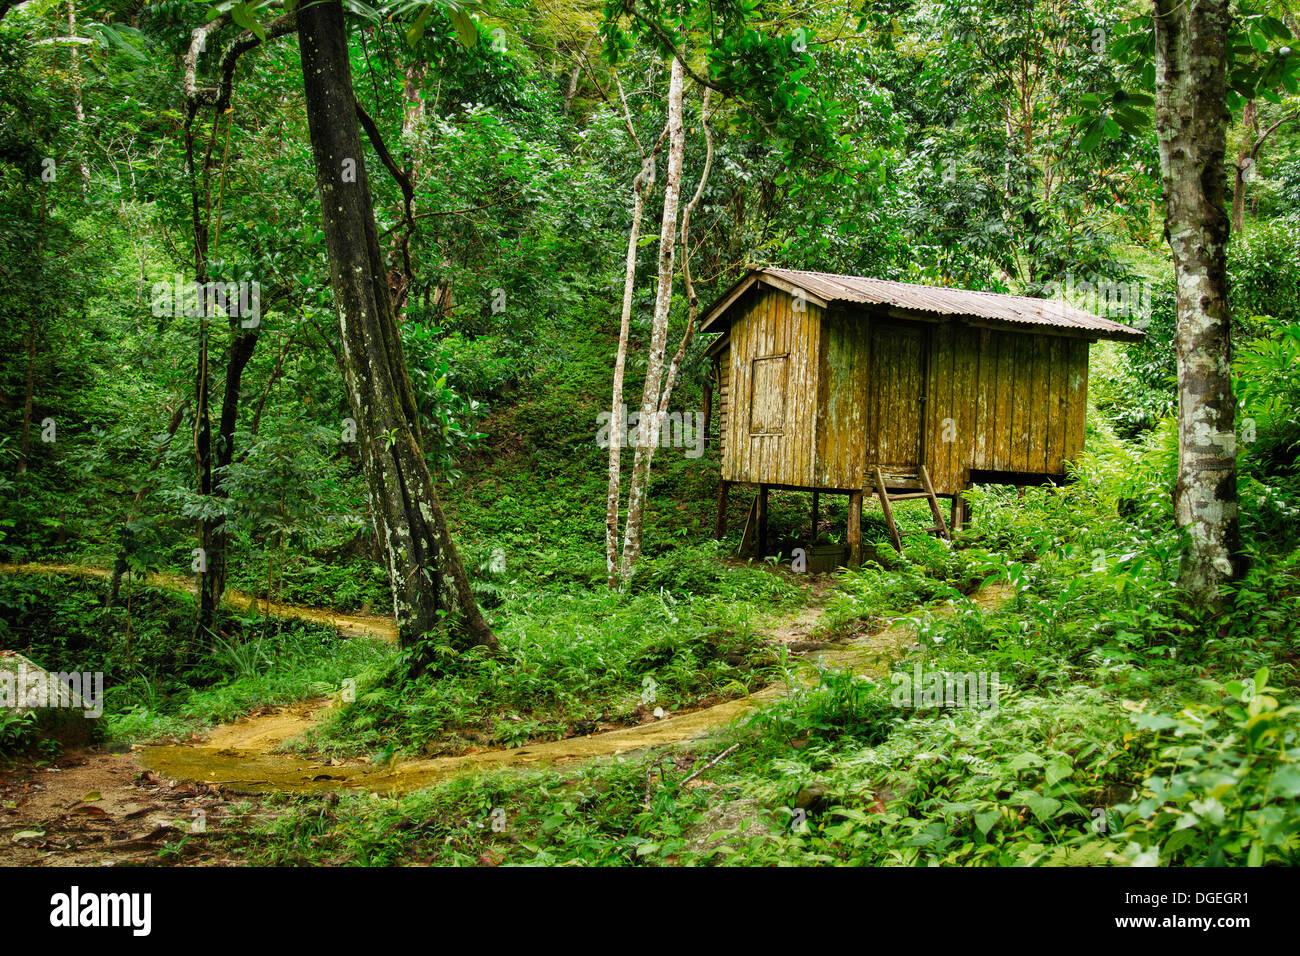 Wooden small house in a tropical forest. Thailand Stock Photo